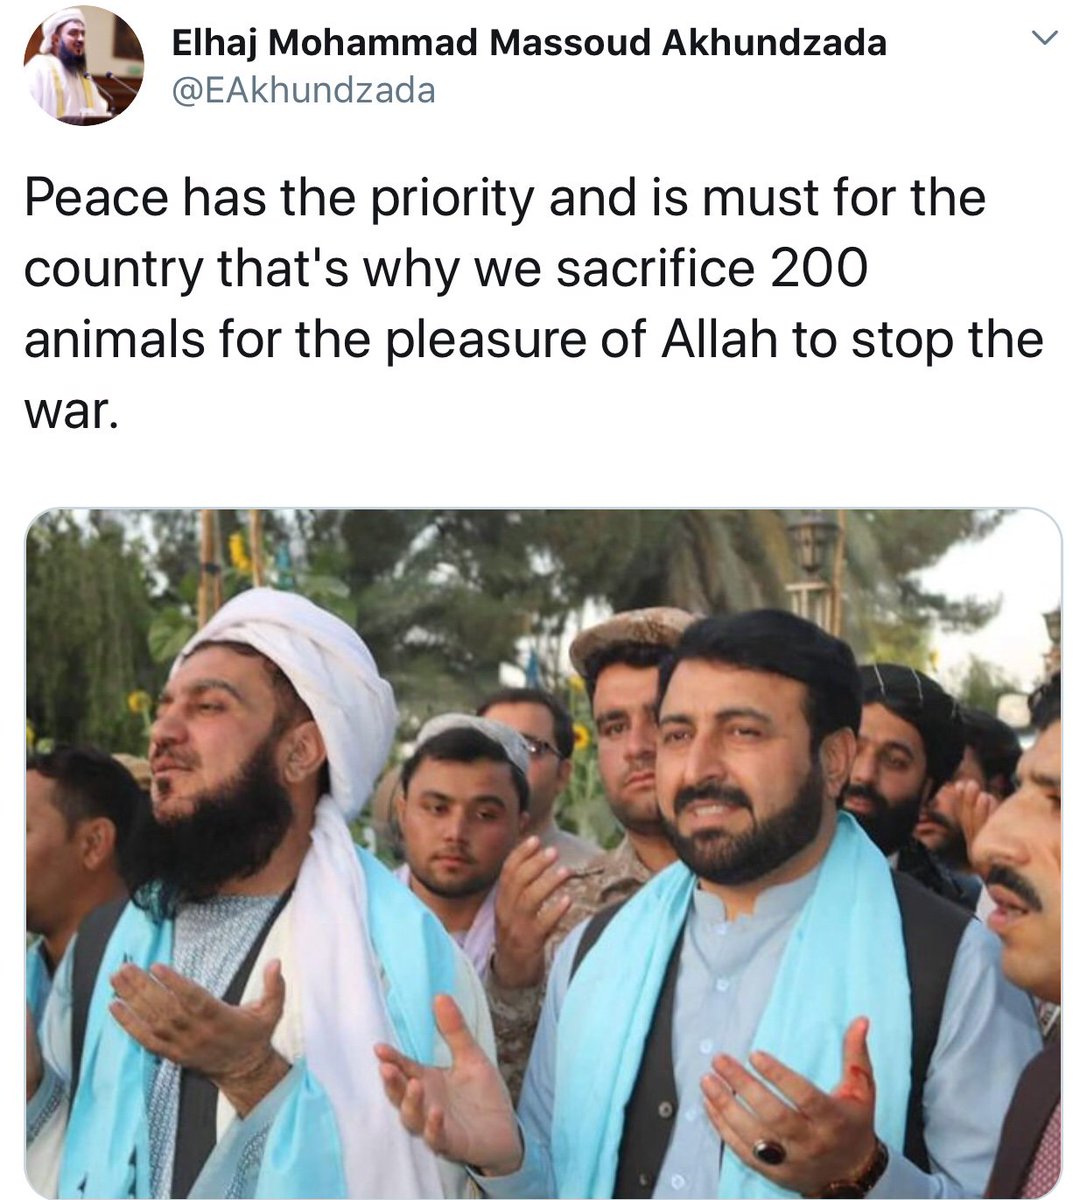 The #BigEid is coming the month of sacrifice for #Allah j . Everyone tries n his own way to bring #peace for #Afghanistan. #Afghans have suffered a lot form war. Hopefully we achieve #peace #AfghansWanPeace